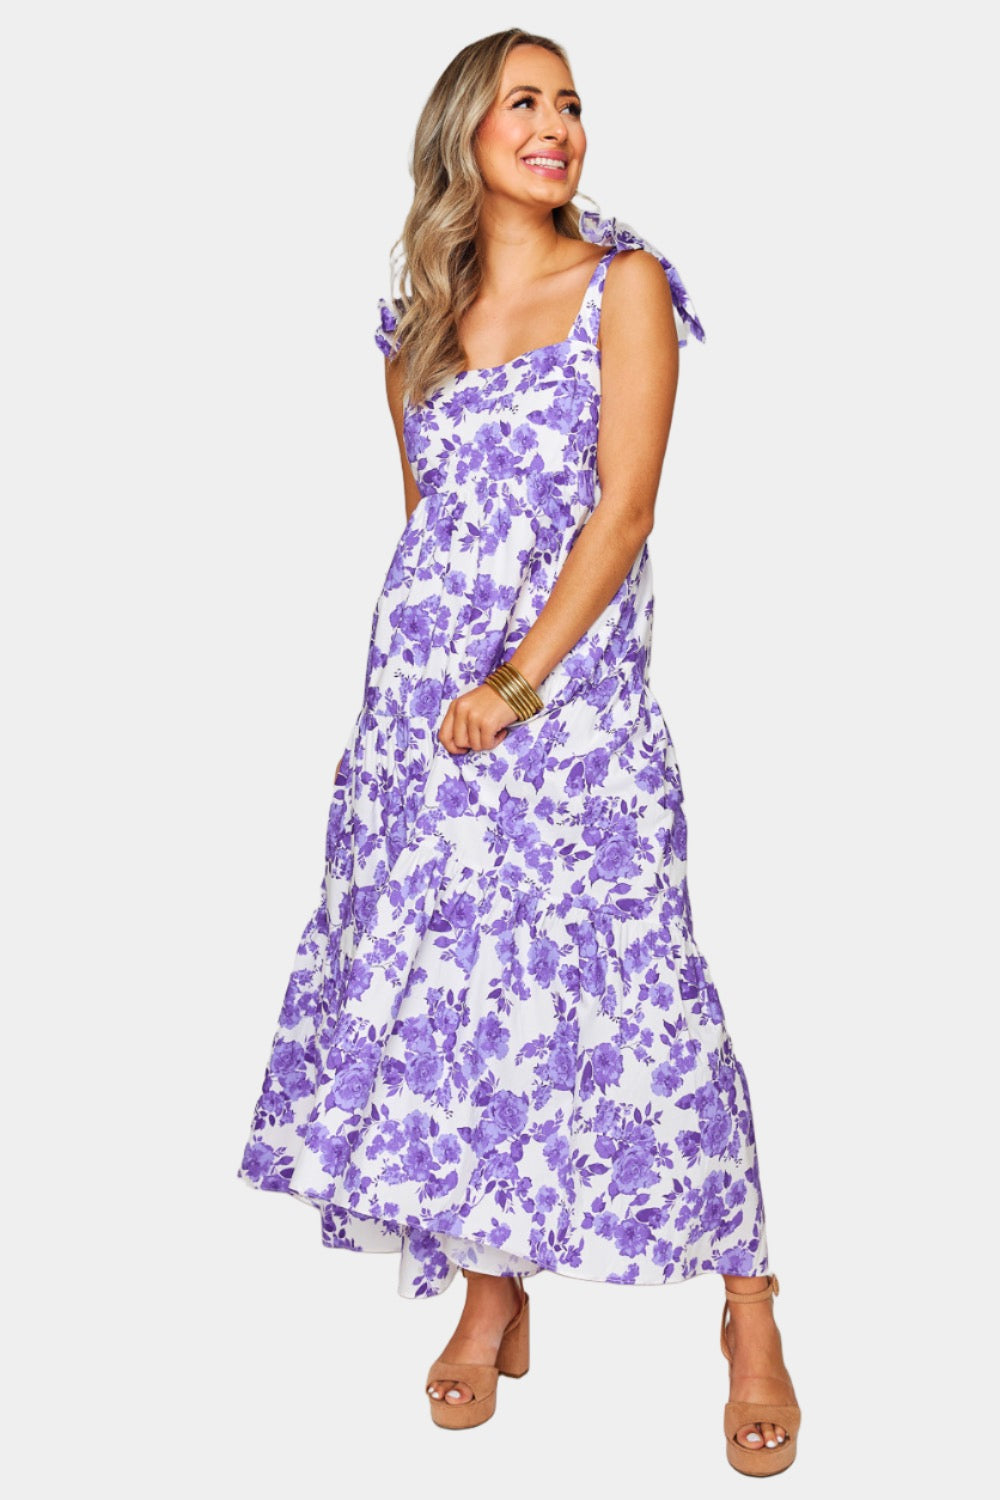 Strapless Purple Floral Long Prom Dresses with Slit, Purple Floral For –  Shiny Party